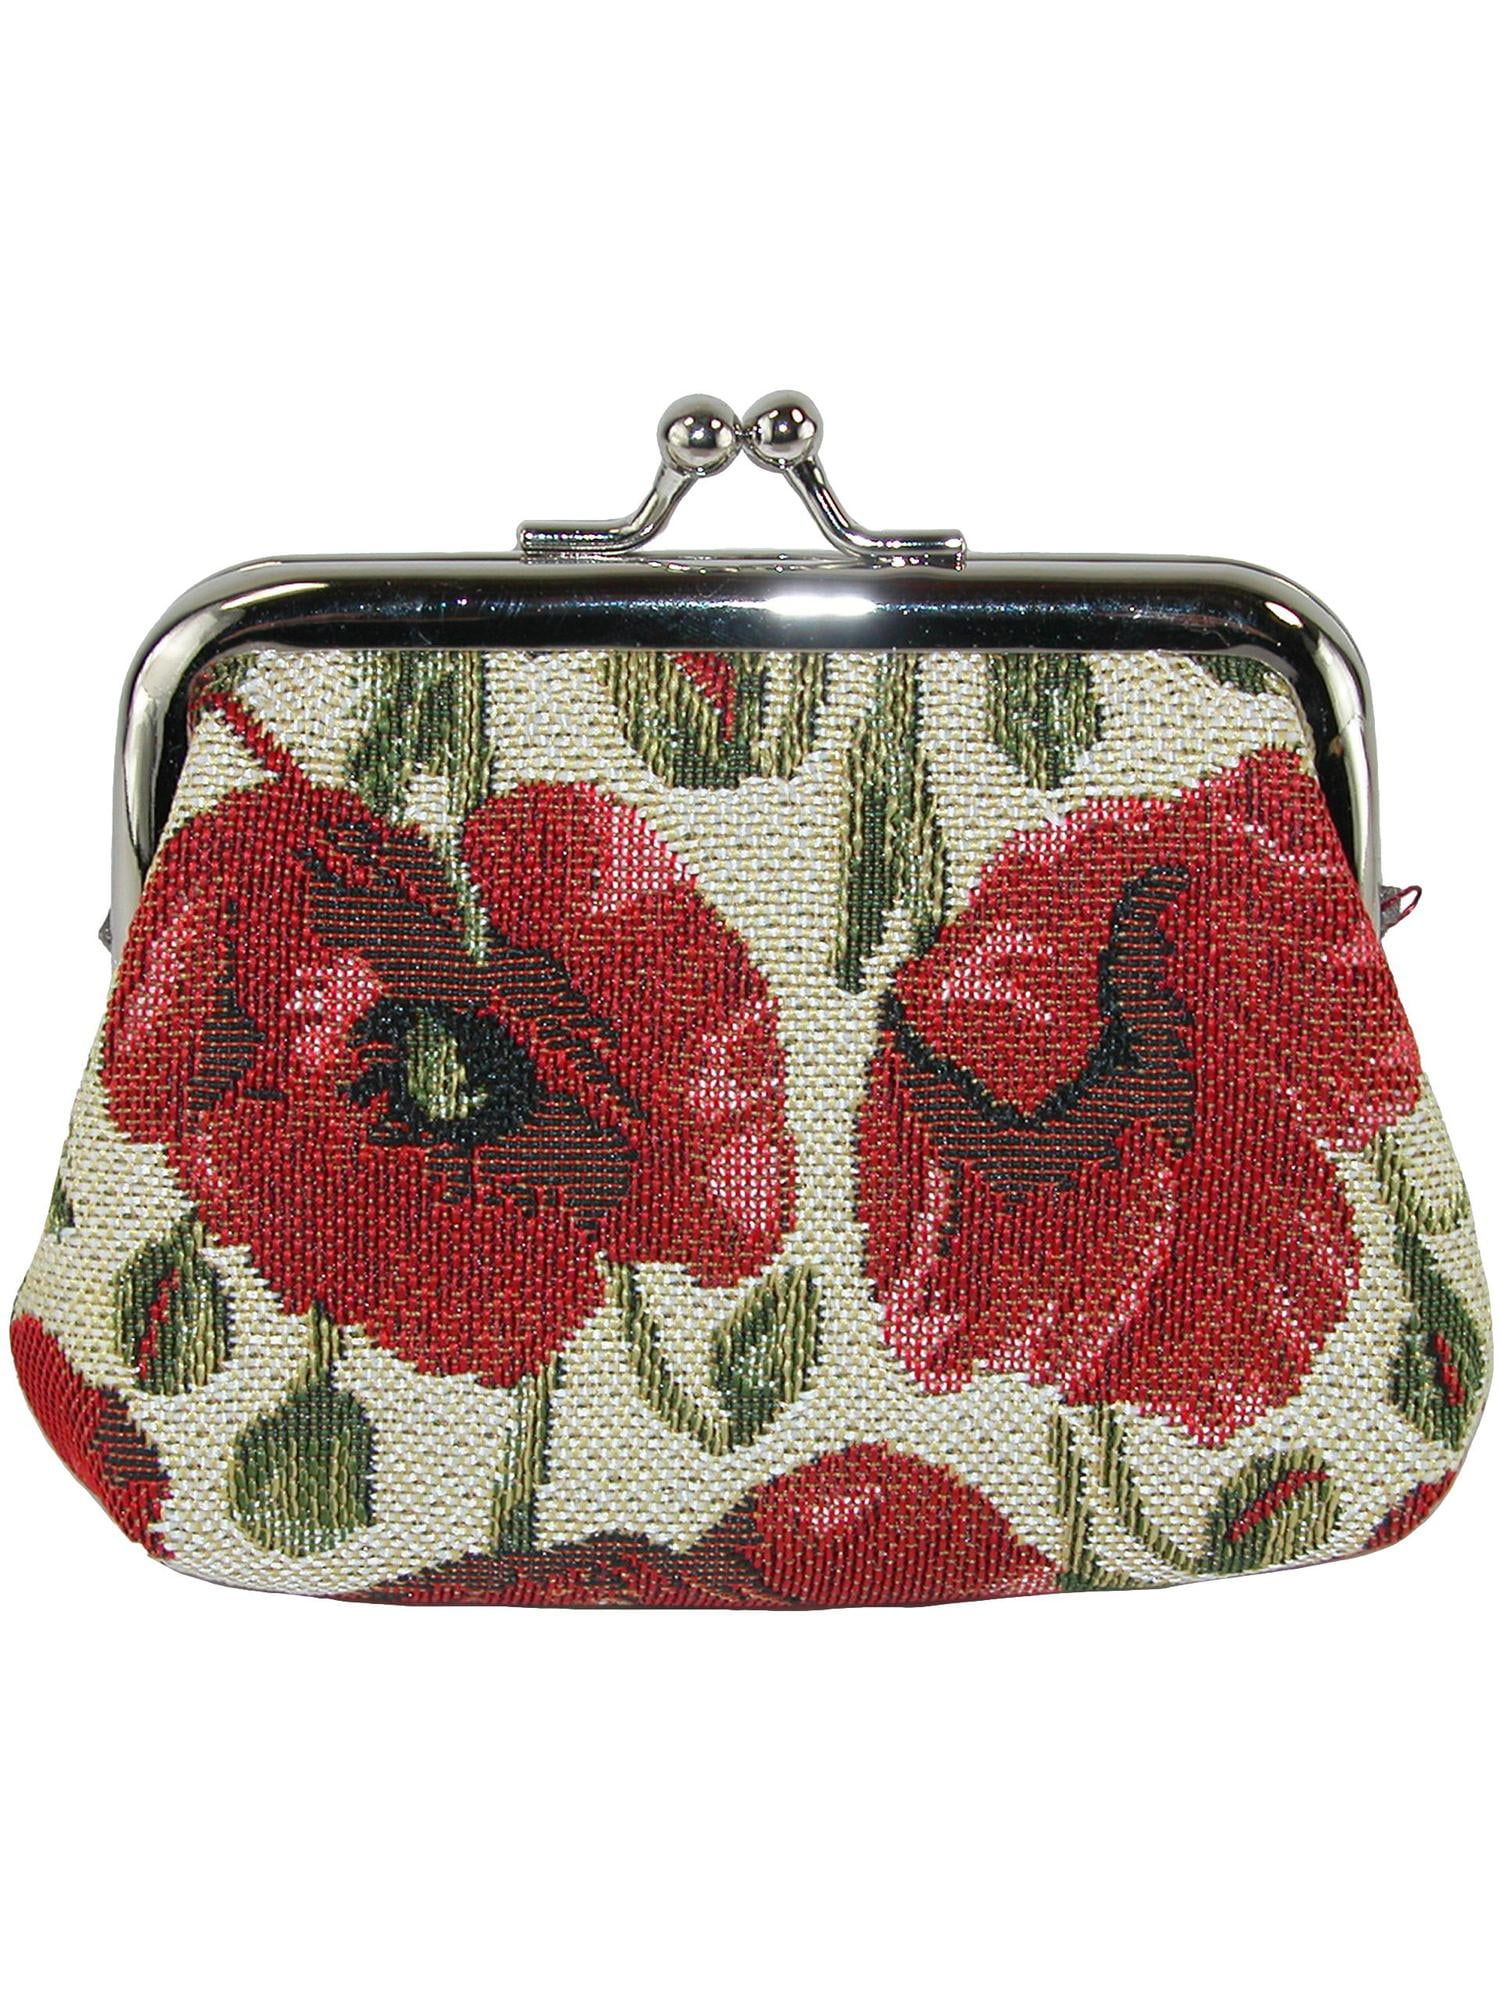 Womens Vintage Coin Purse Colored Eyes Pattern Canvas Makeup Bag With Zipper For Women